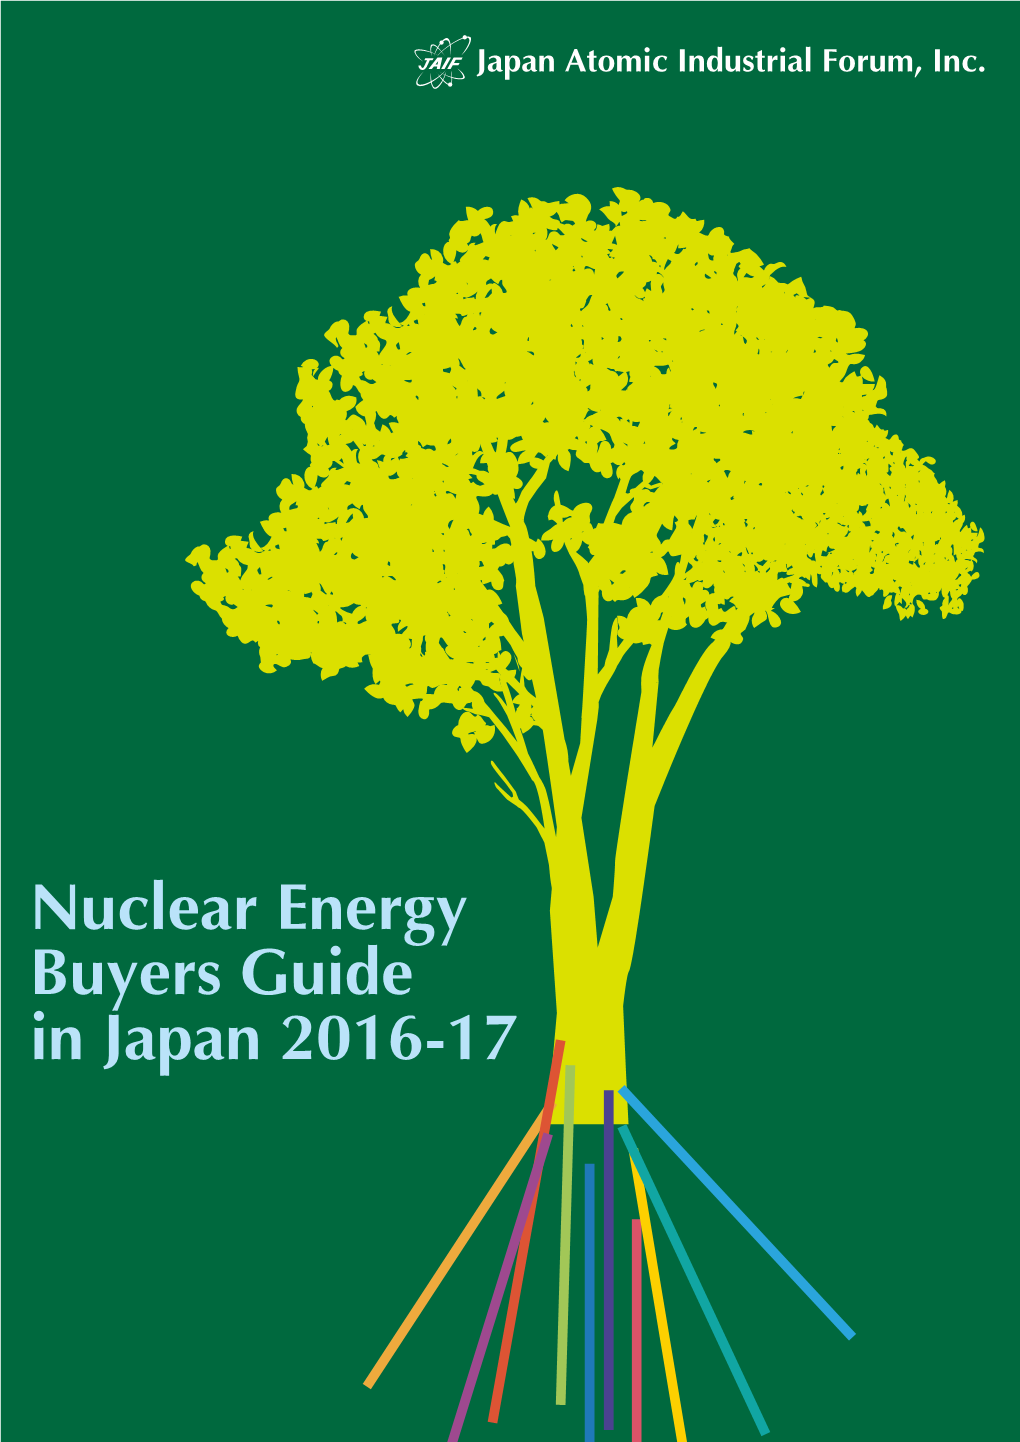 Nuclear Energy Buyers Guide in Japan 2016-17 Introduction